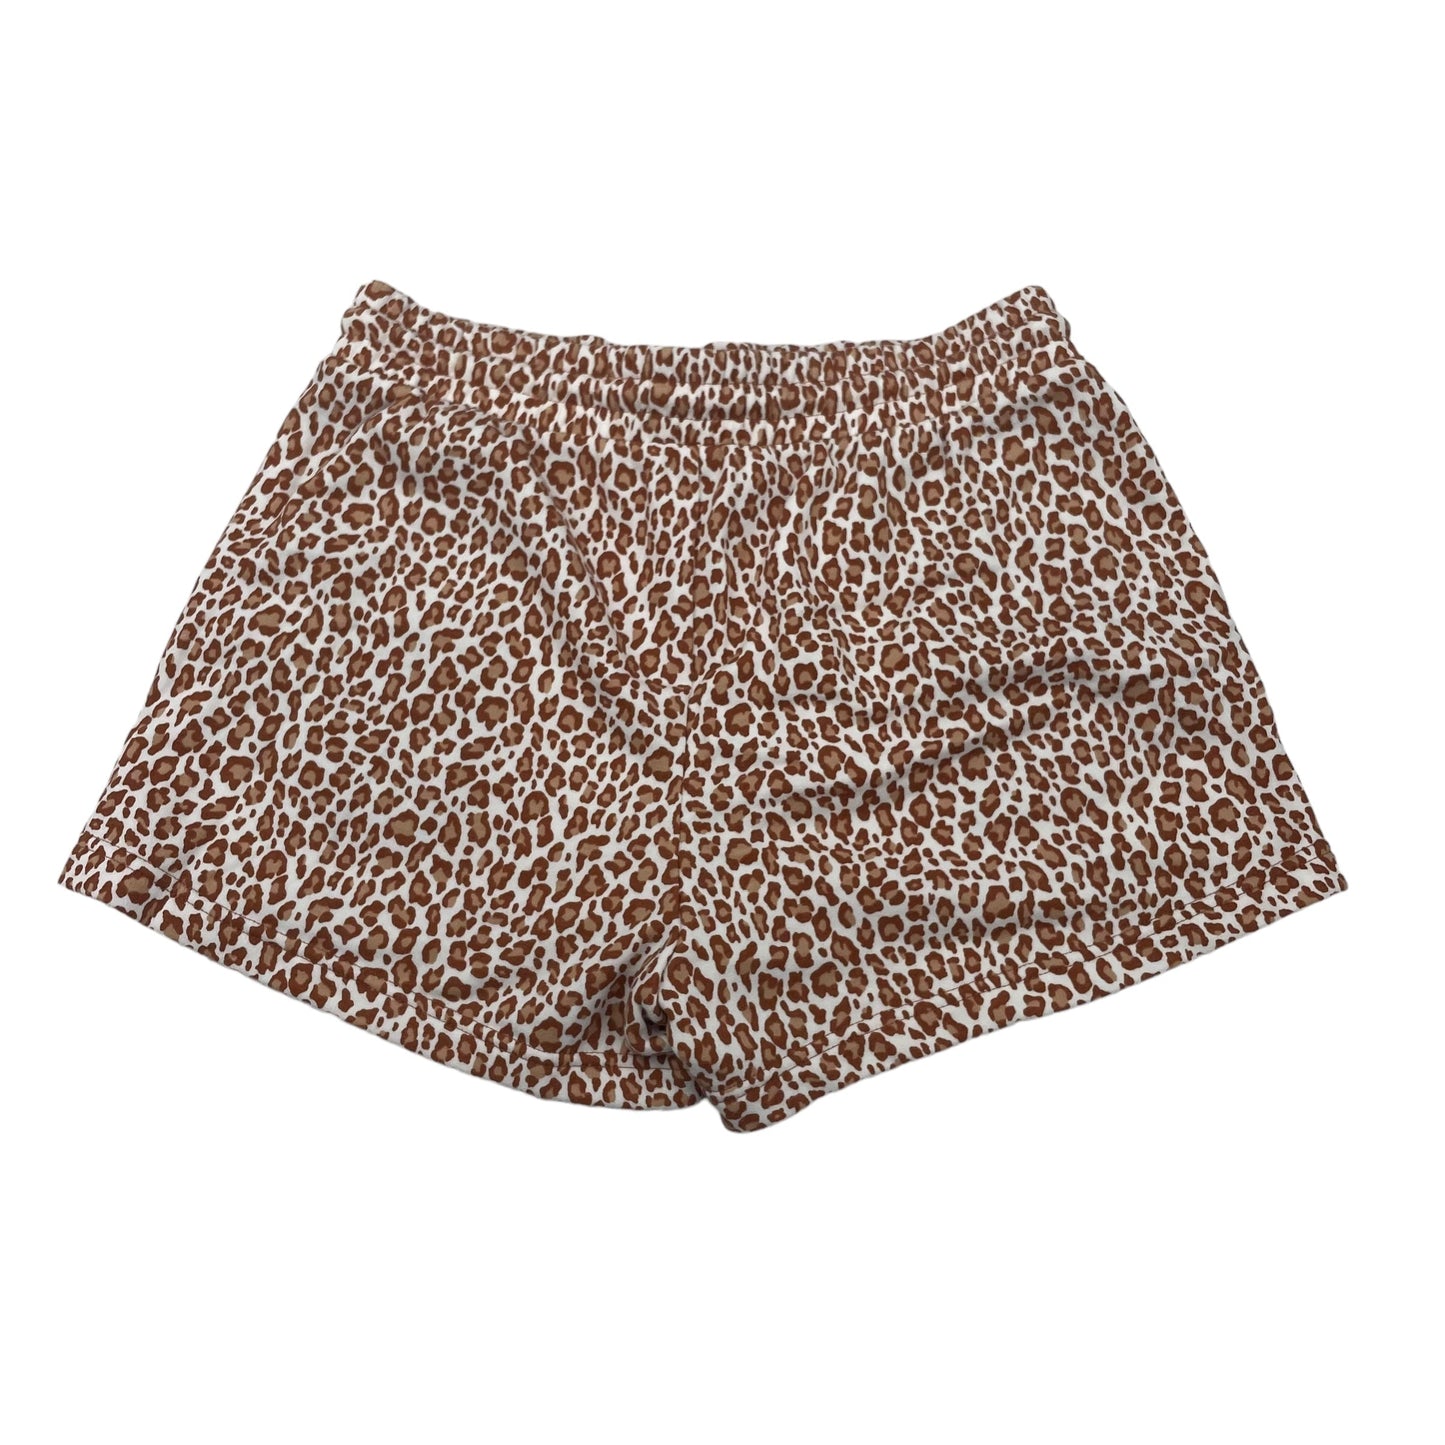 ANIMAL PRINT SHORTS by LOU AND GREY Size:S